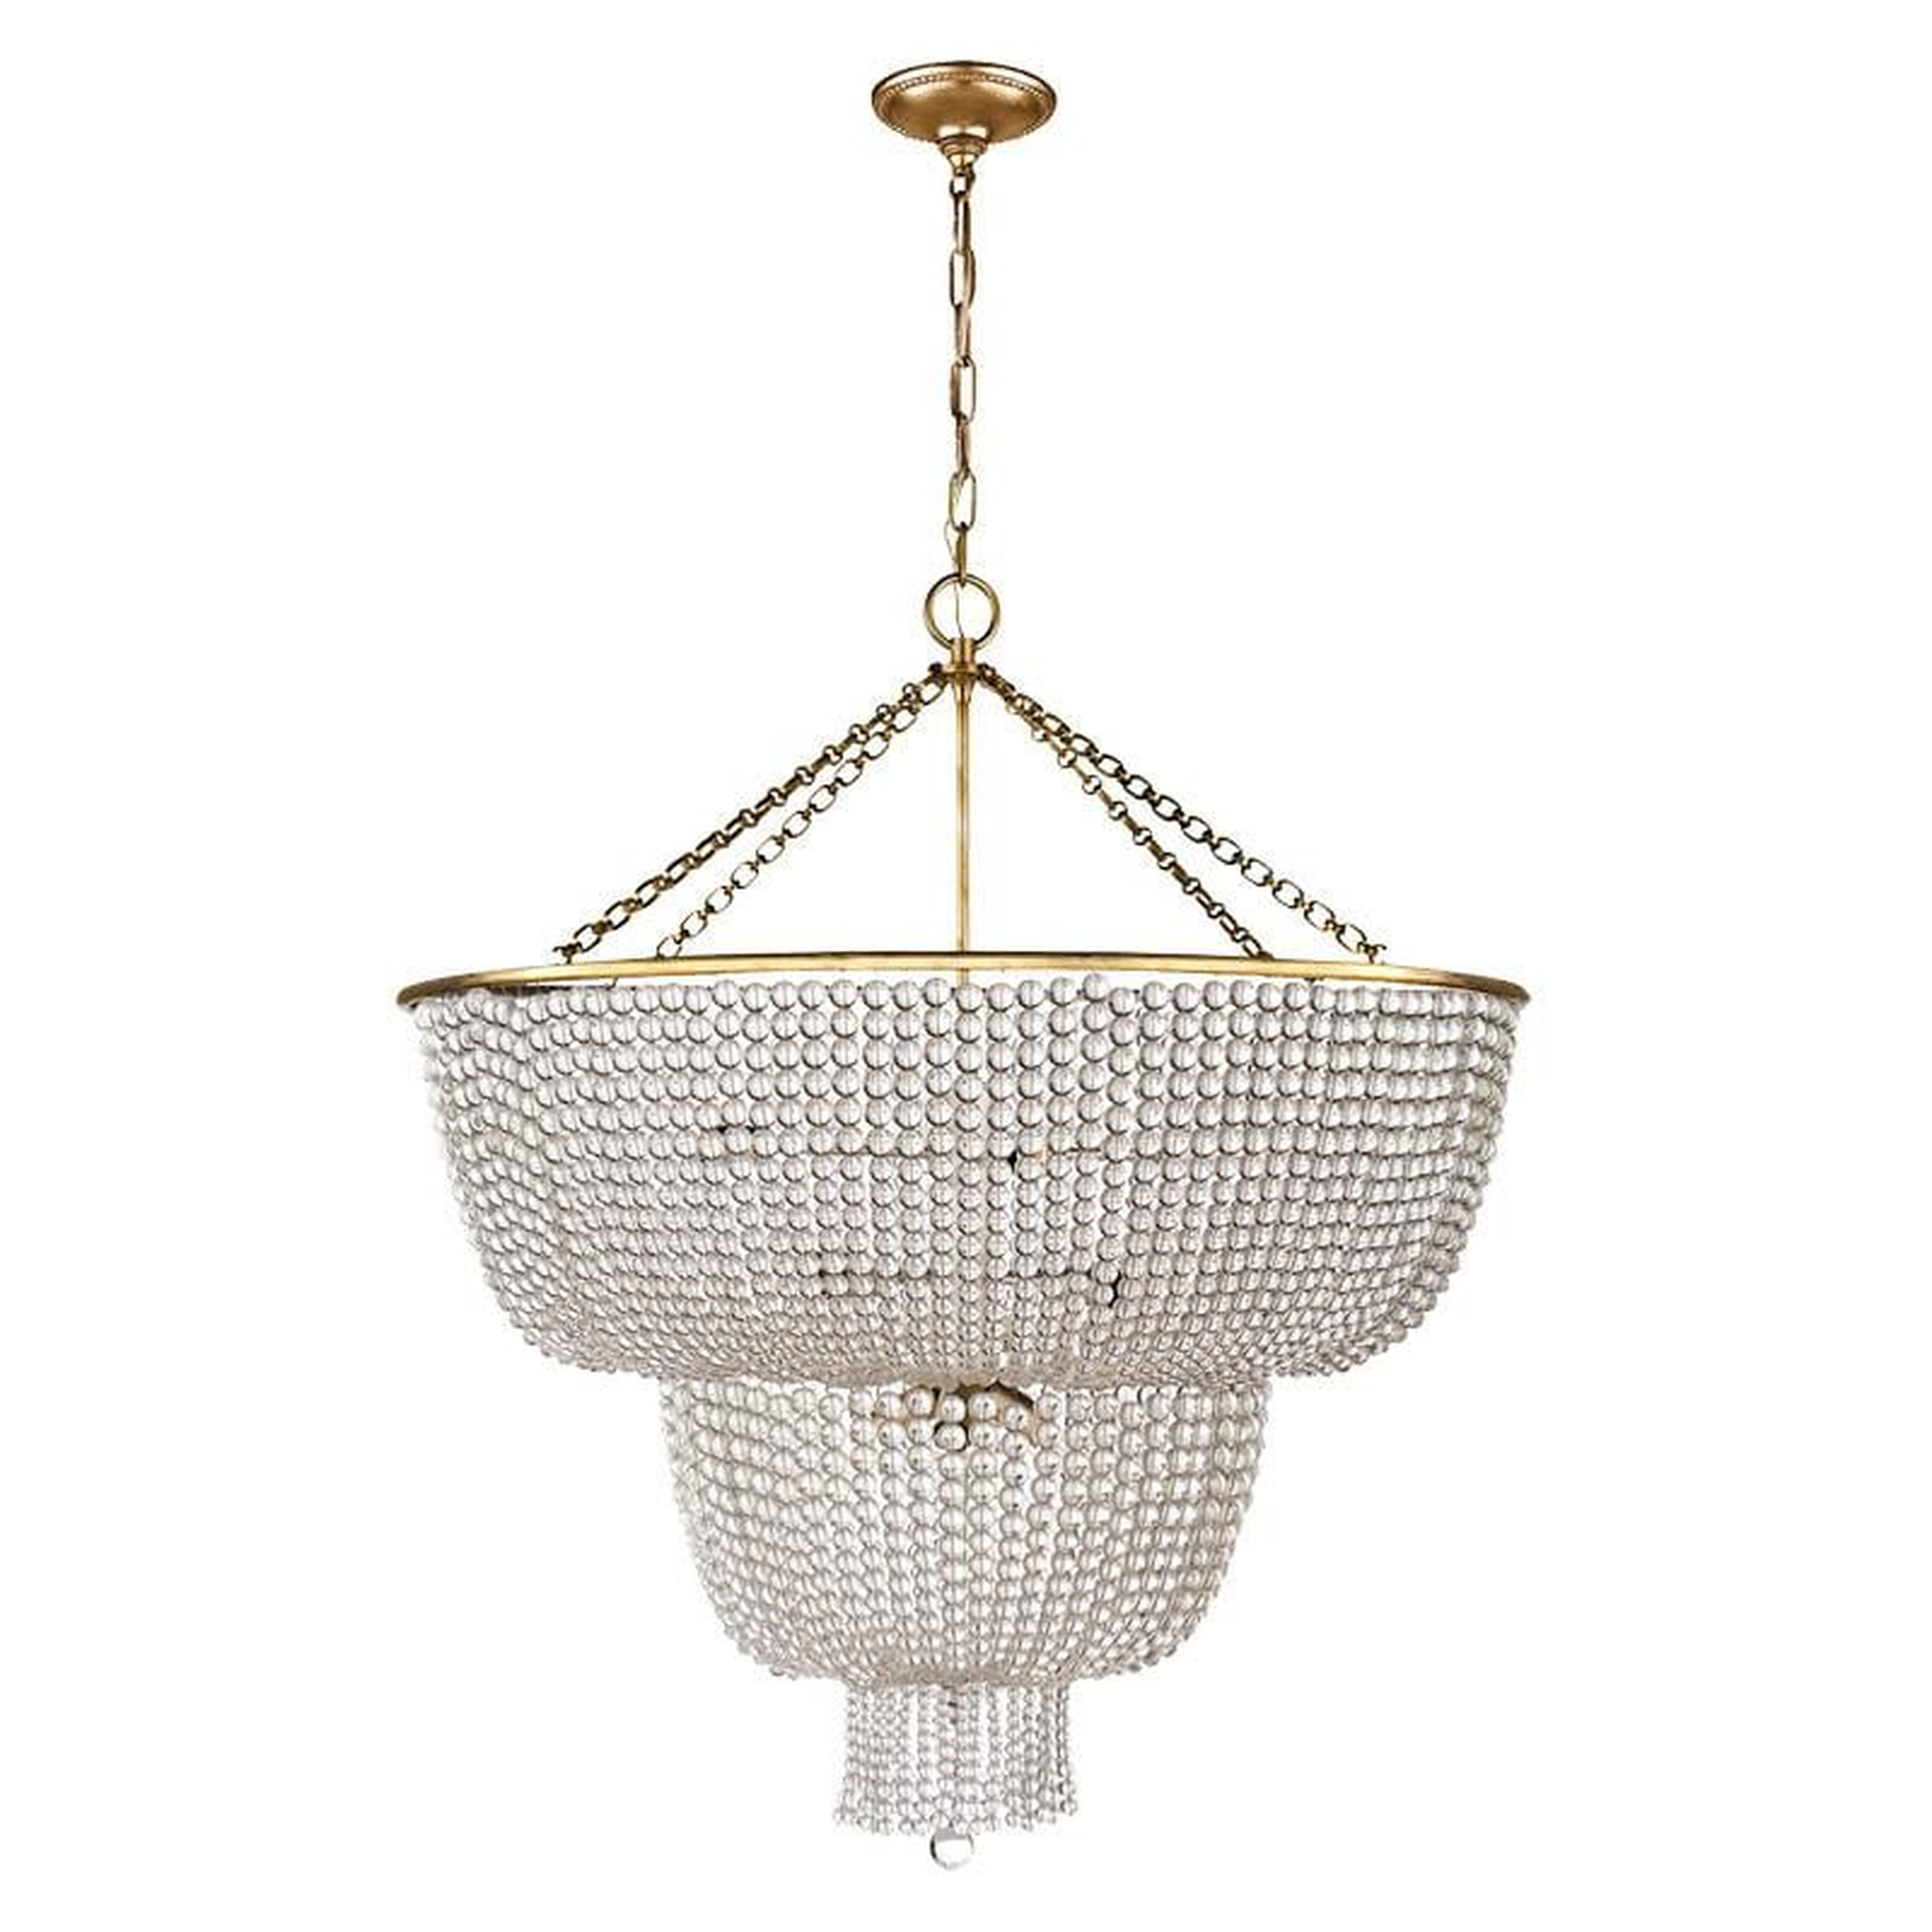 JACQUELINE LARGE CHANDELIER WITH CLEAR GLASS SHADE - HAND-RUBBED ANTIQUE BRASS - McGee & Co.